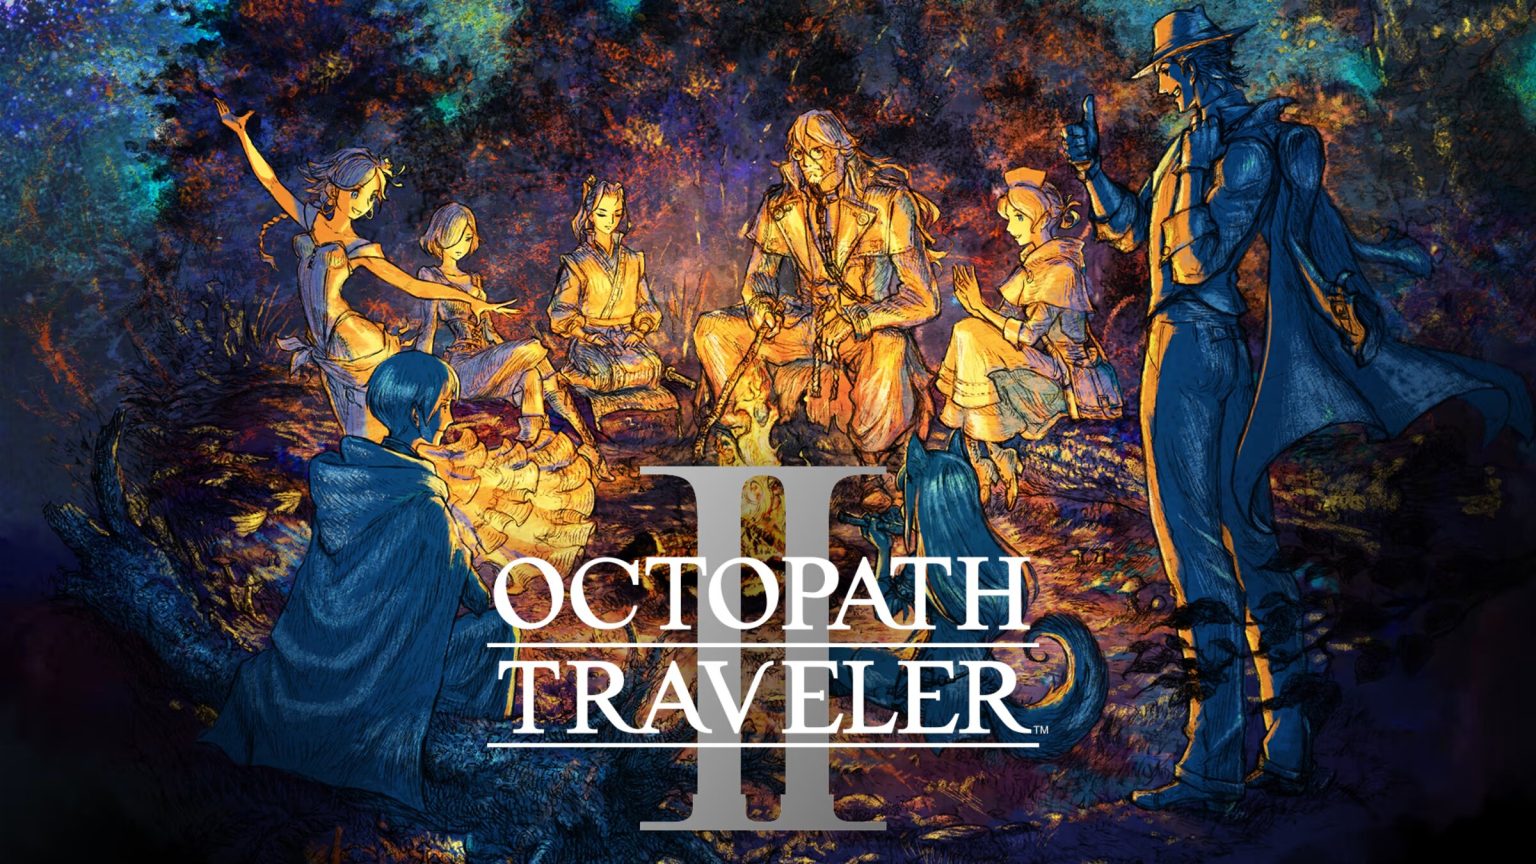 How to Unlock All Secondary Jobs in Octopath Traveler 2